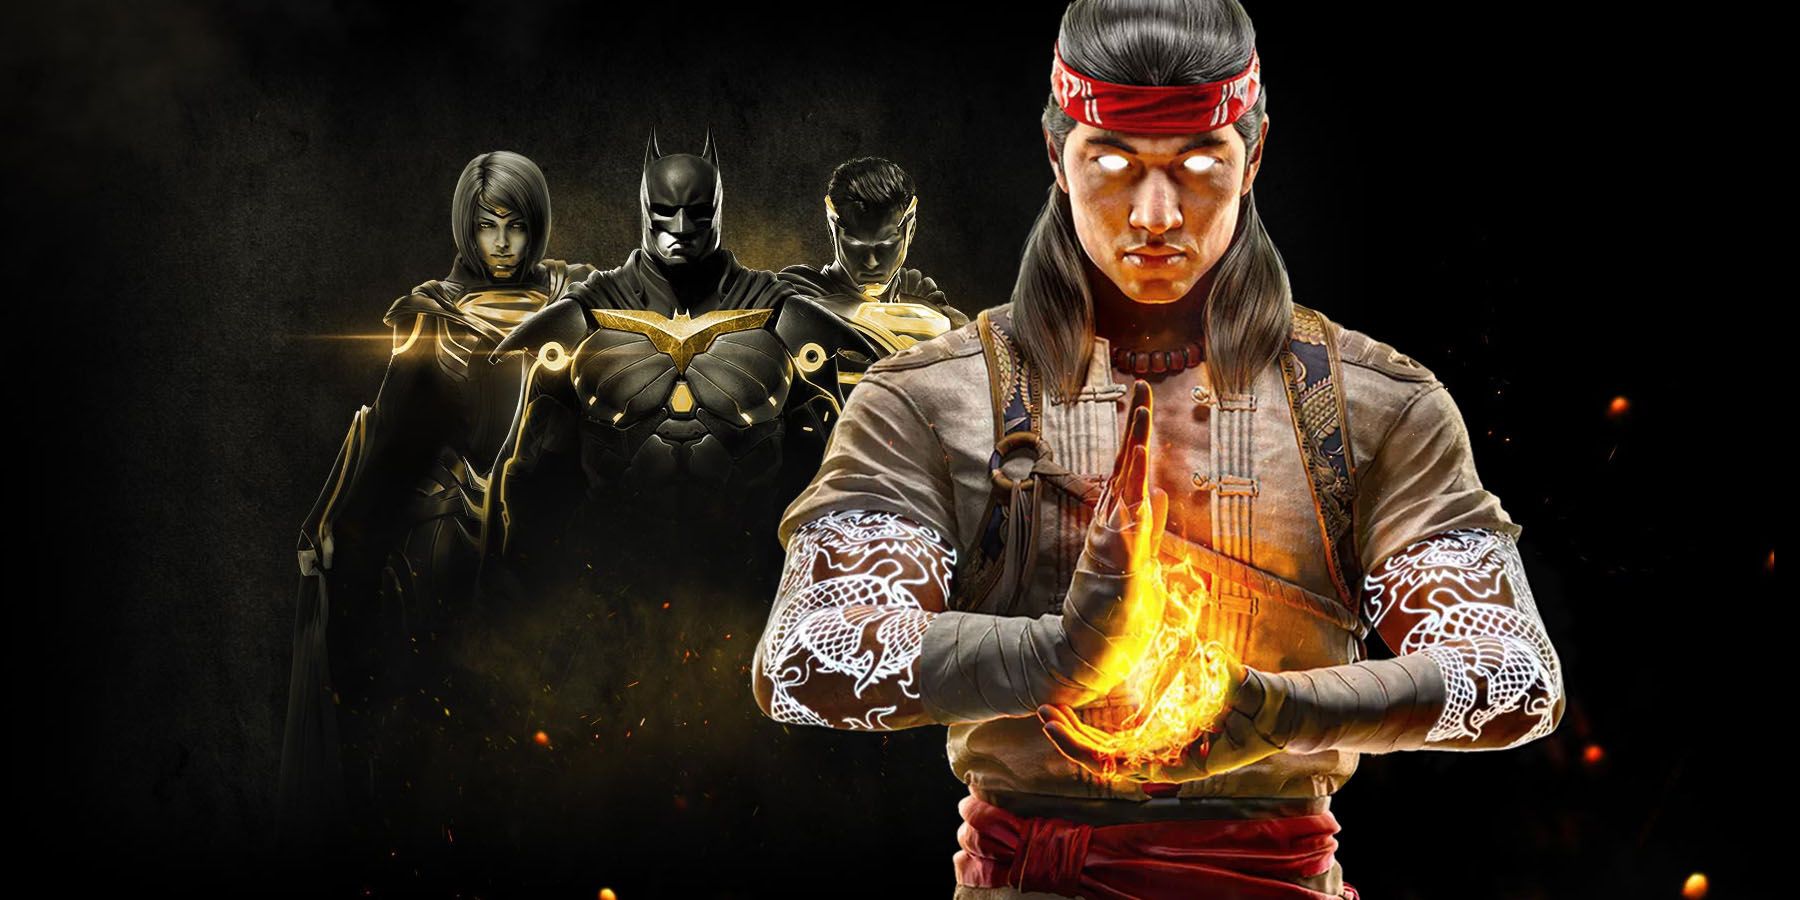 A image of Mortal Kombat 1's Liu Kang standing in front of Superman, Batman, and Supergirl from Injustice 2.